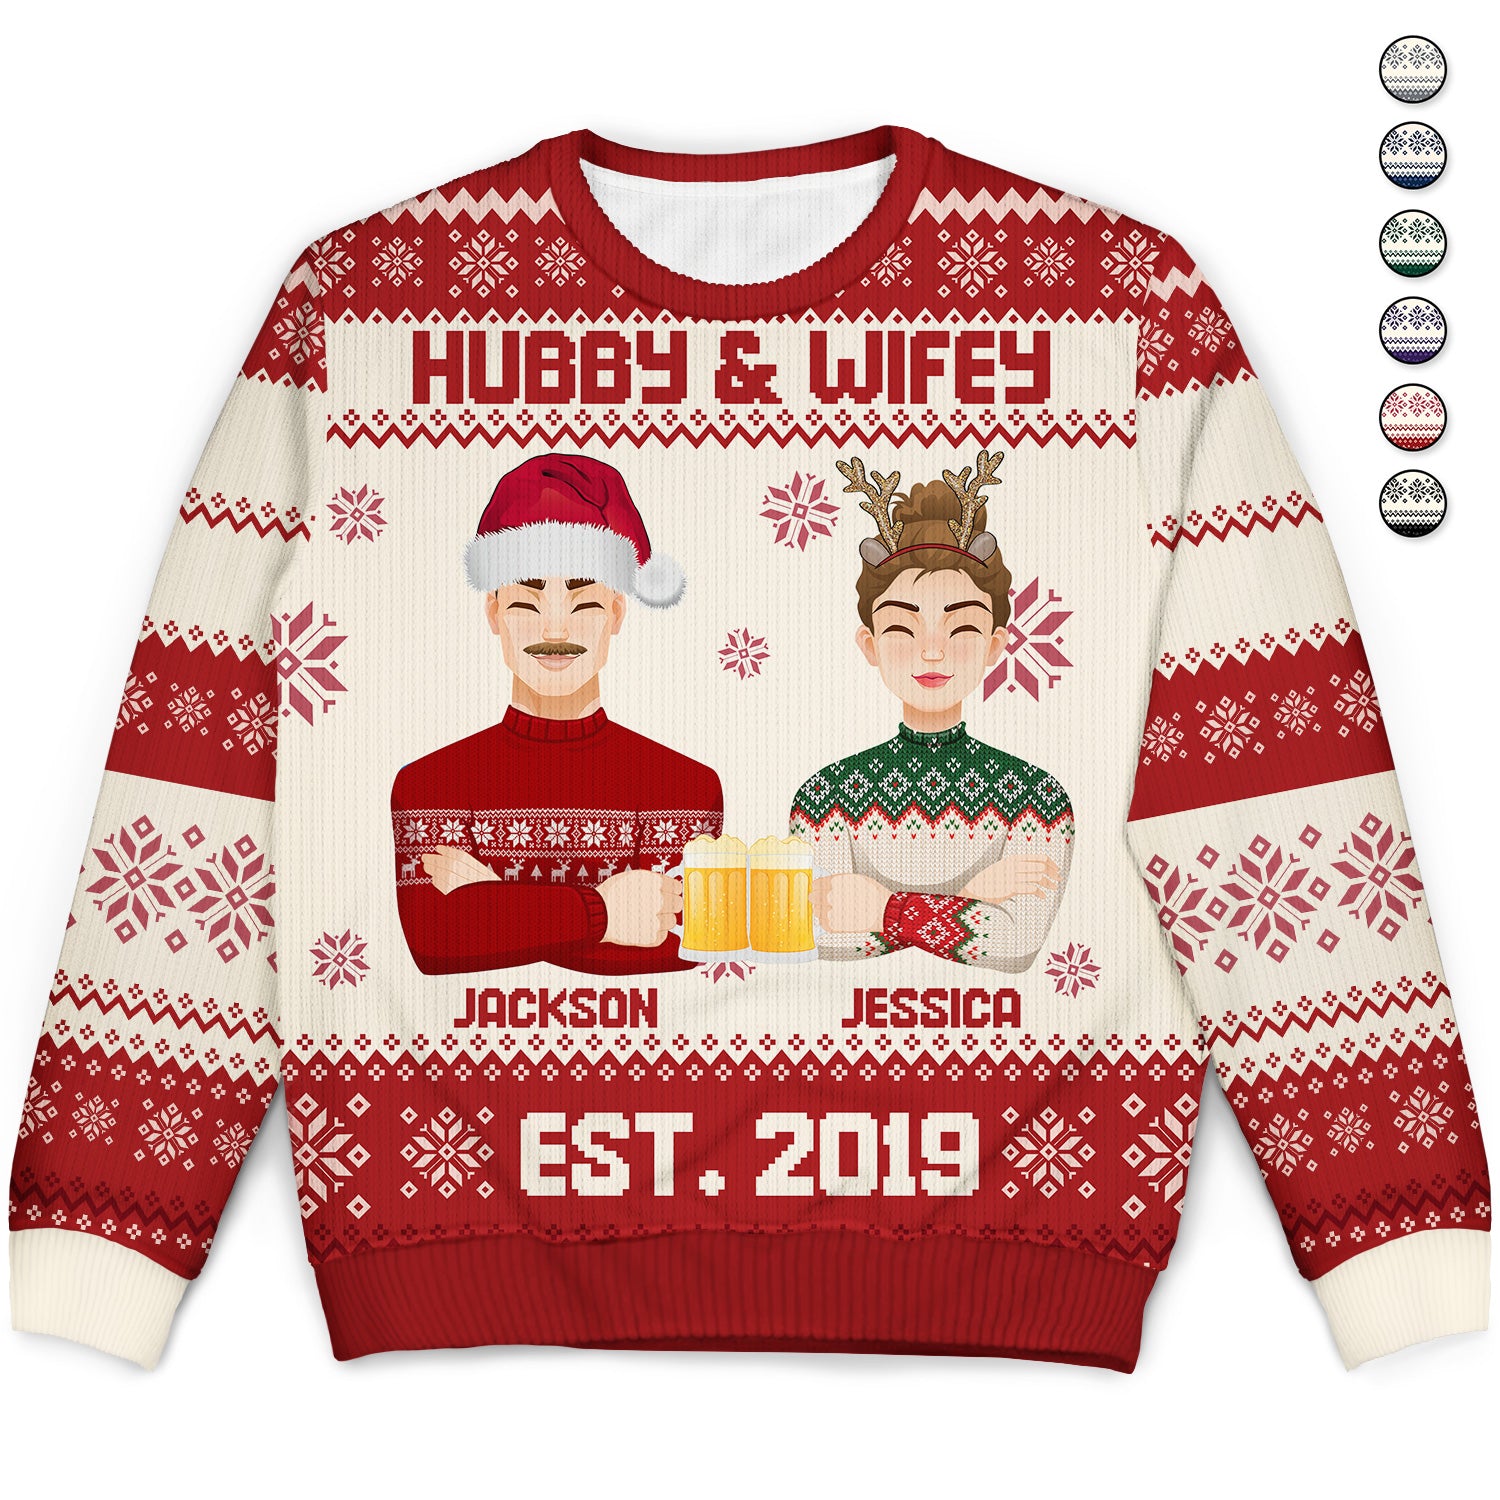 Hubby & Wifey - Anniversary, Christmas Gift For Couples, Husband, Wife - Personalized Unisex Ugly Sweater